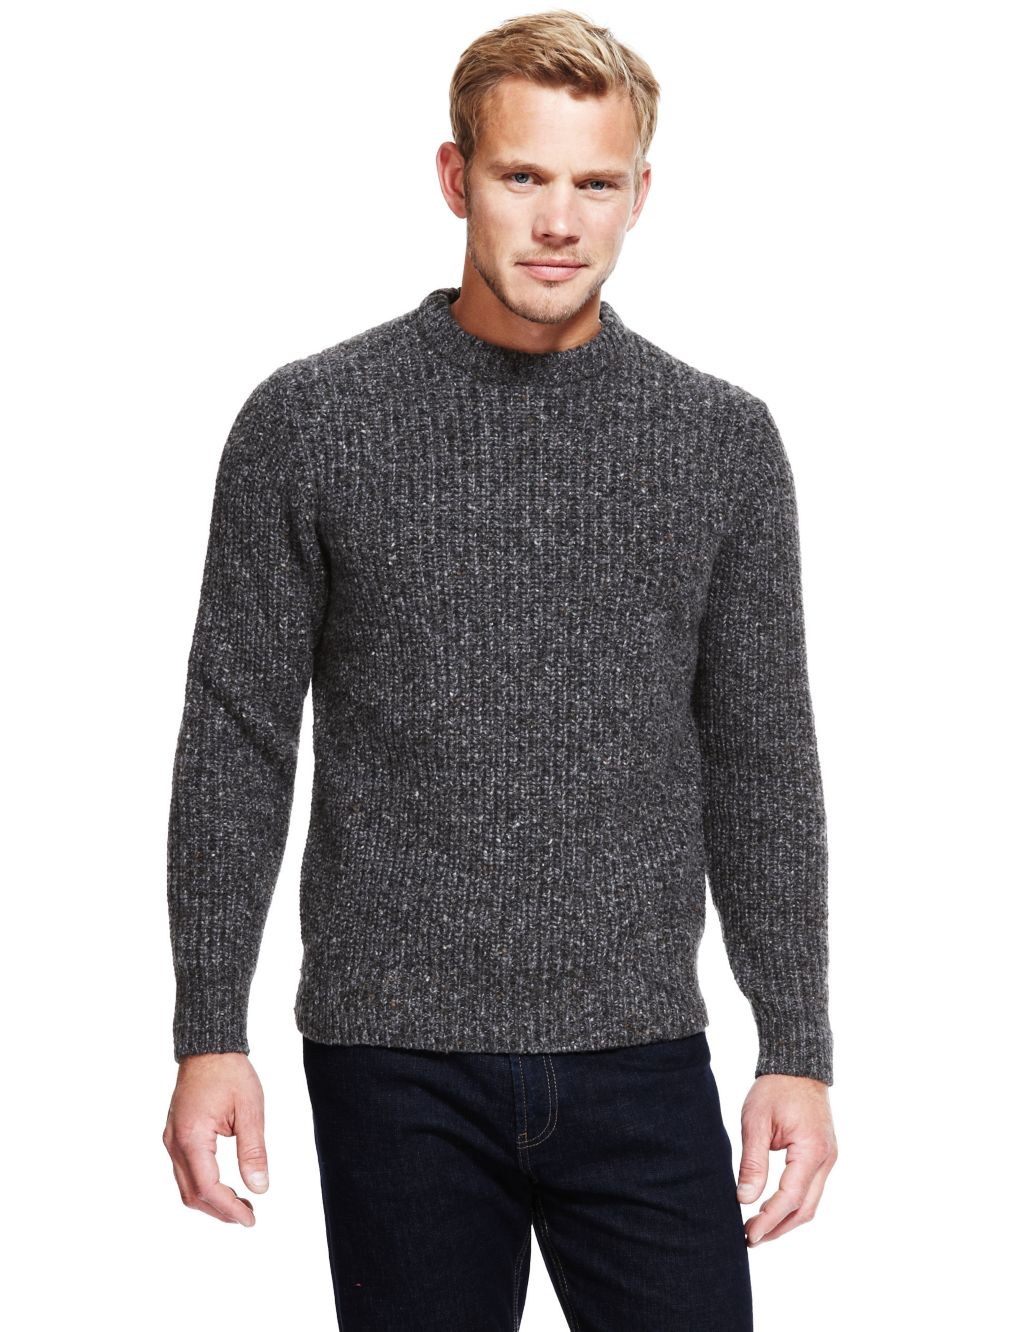 Heritage Lambswool Blend Crew Neck Chunky Knit Jumper | Blue Harbour | M&S